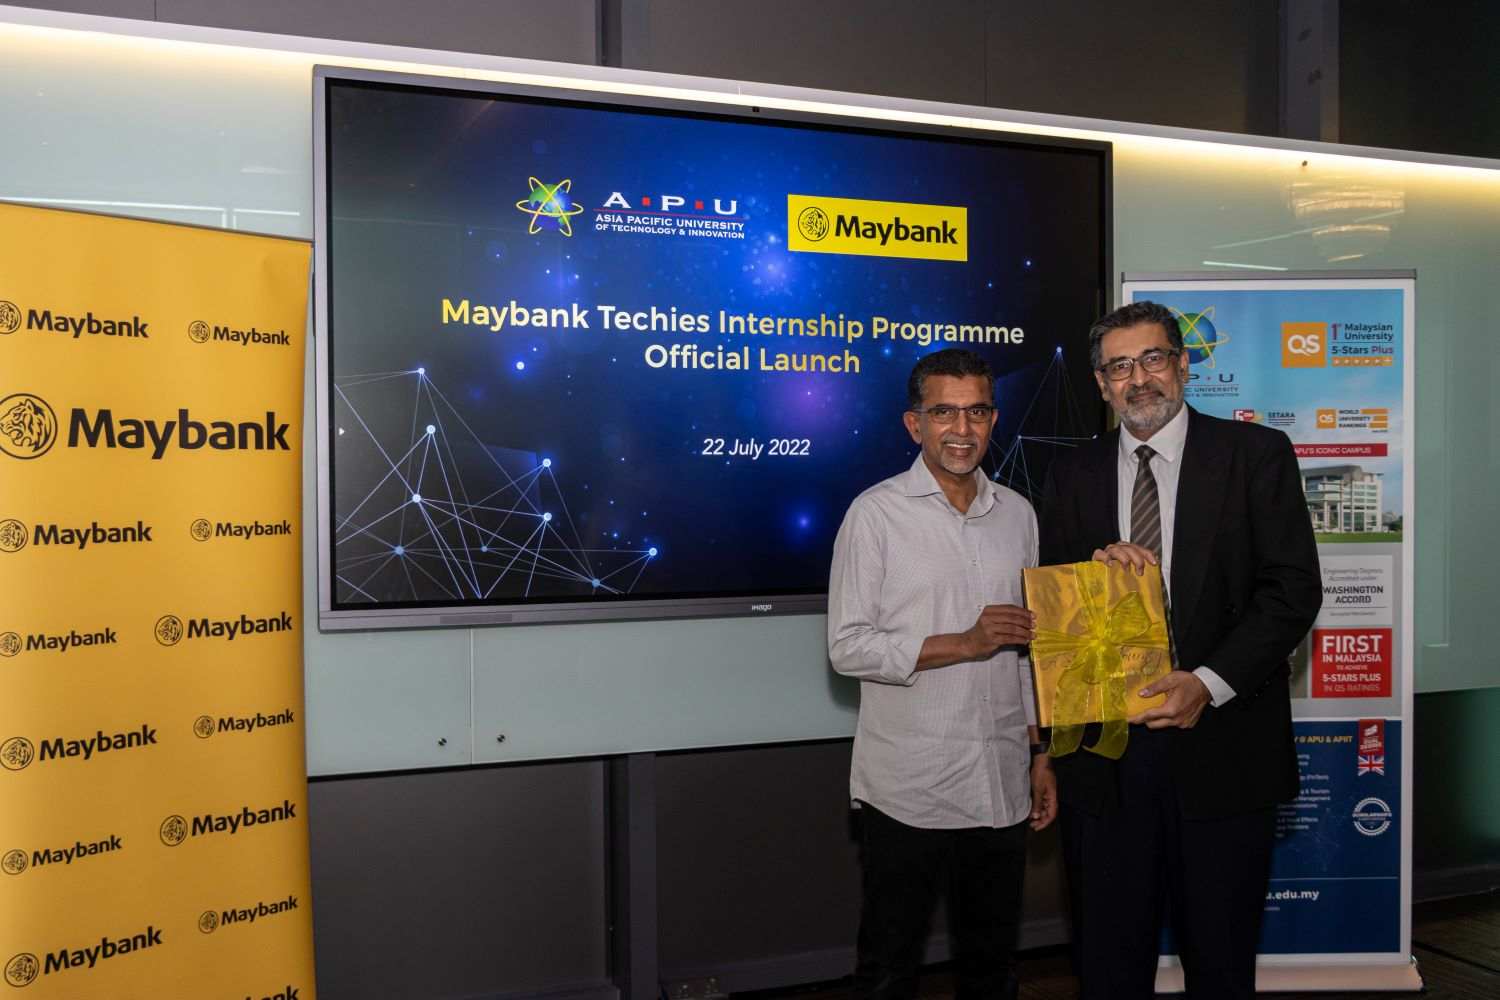 Mr Mohd Suhail Amar Suresh (from left), Group Chief Technology Officer, Maybank, received a memento from Mr Gurpardeep Singh, Chief Operating Officer, APU, at the official launch ceremony of the Maybank Techies Internship Programme.